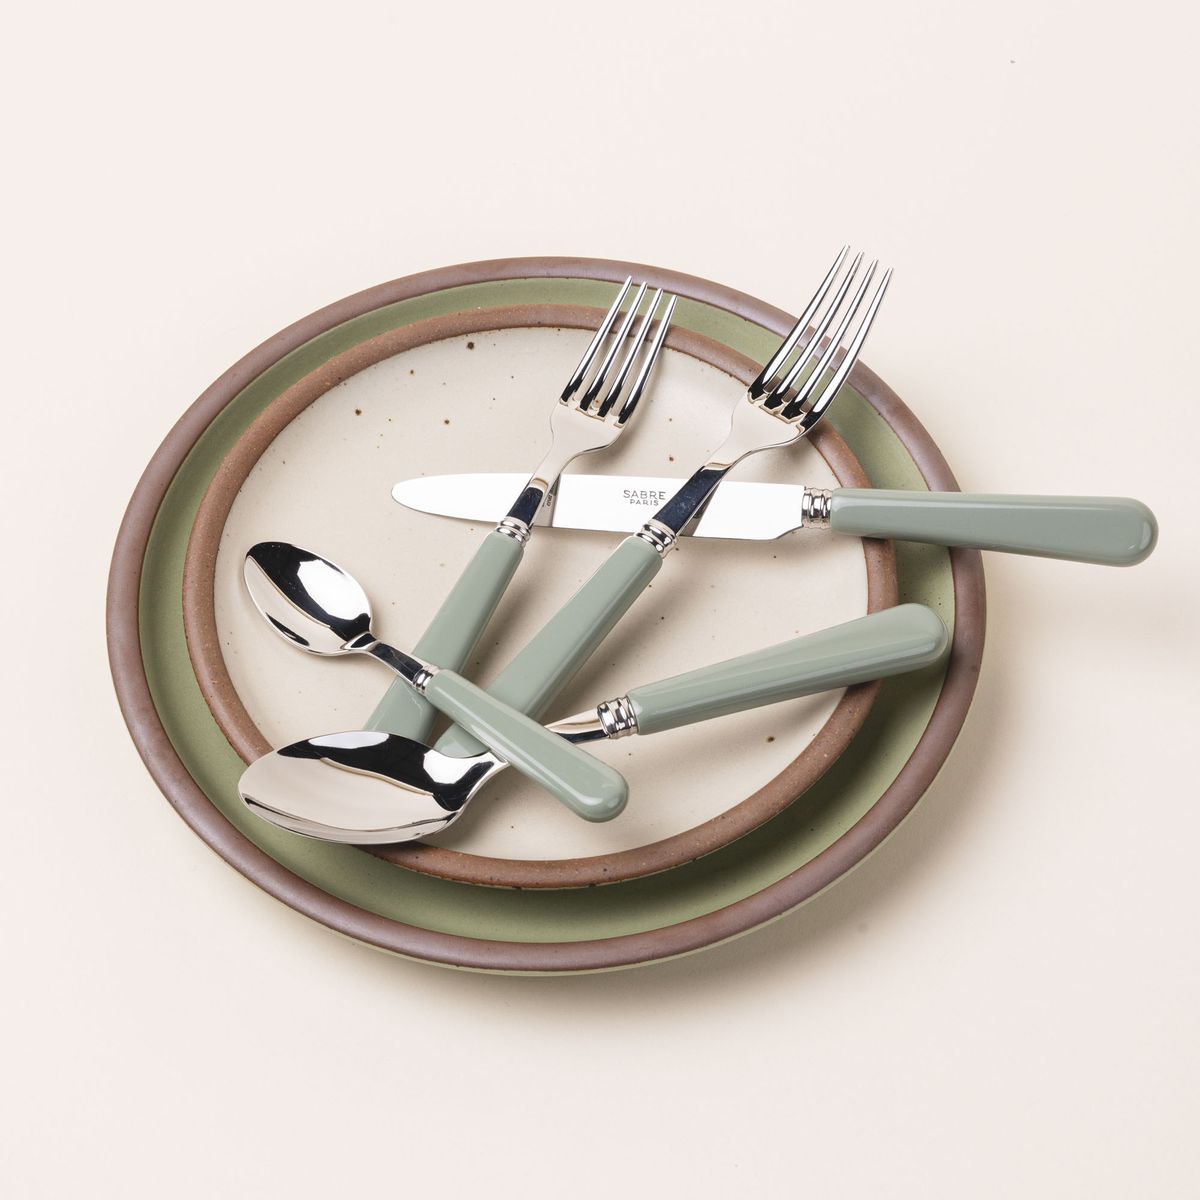 A five piece flatware set with shiny utensils and matte sage green handles sits on two ceramic plates in off-white and calming sage green